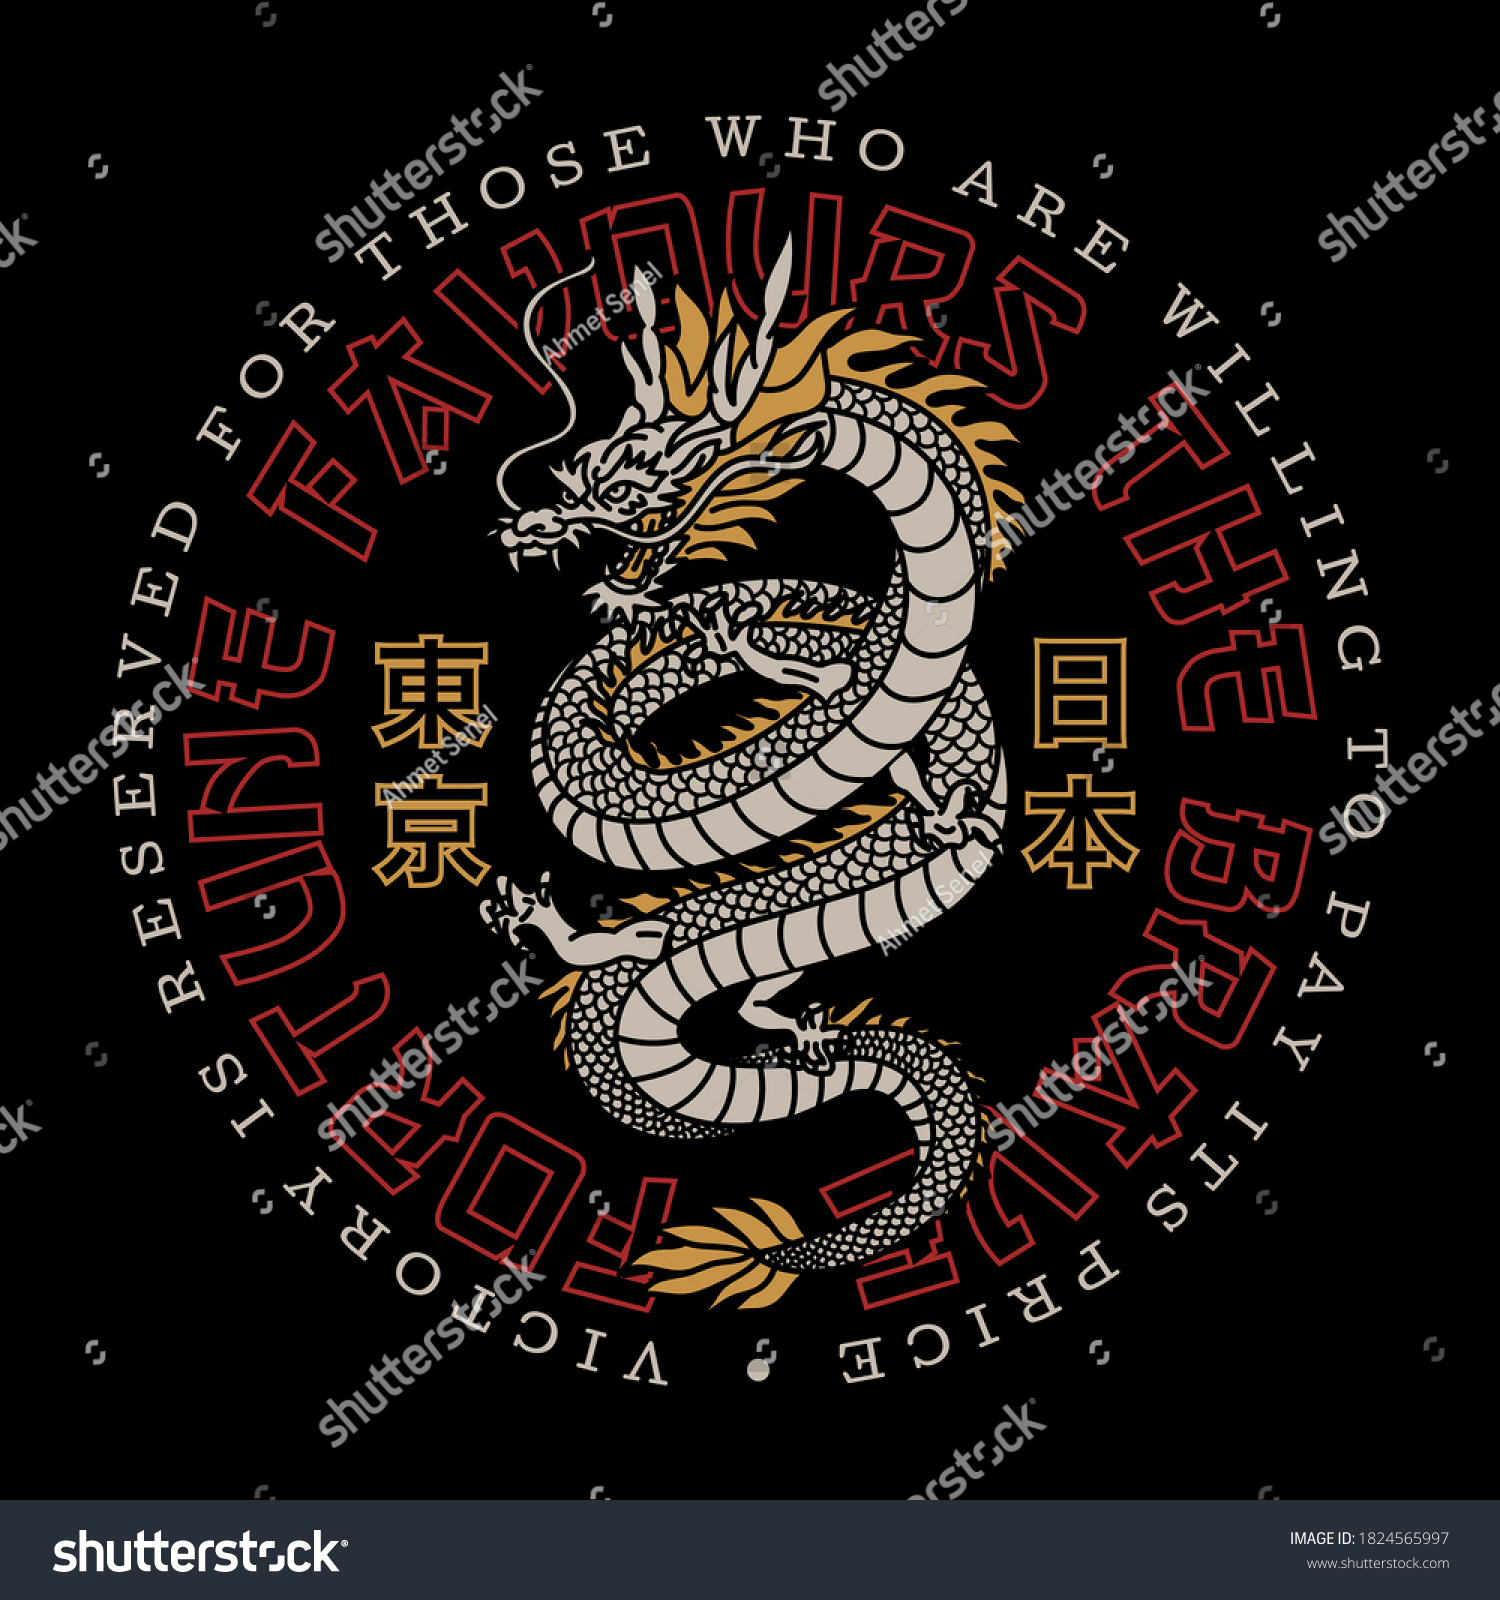 Asian Dragon Illustration with A Slogan Artwork - Tokyo Japan Words in Japanese #1824565997